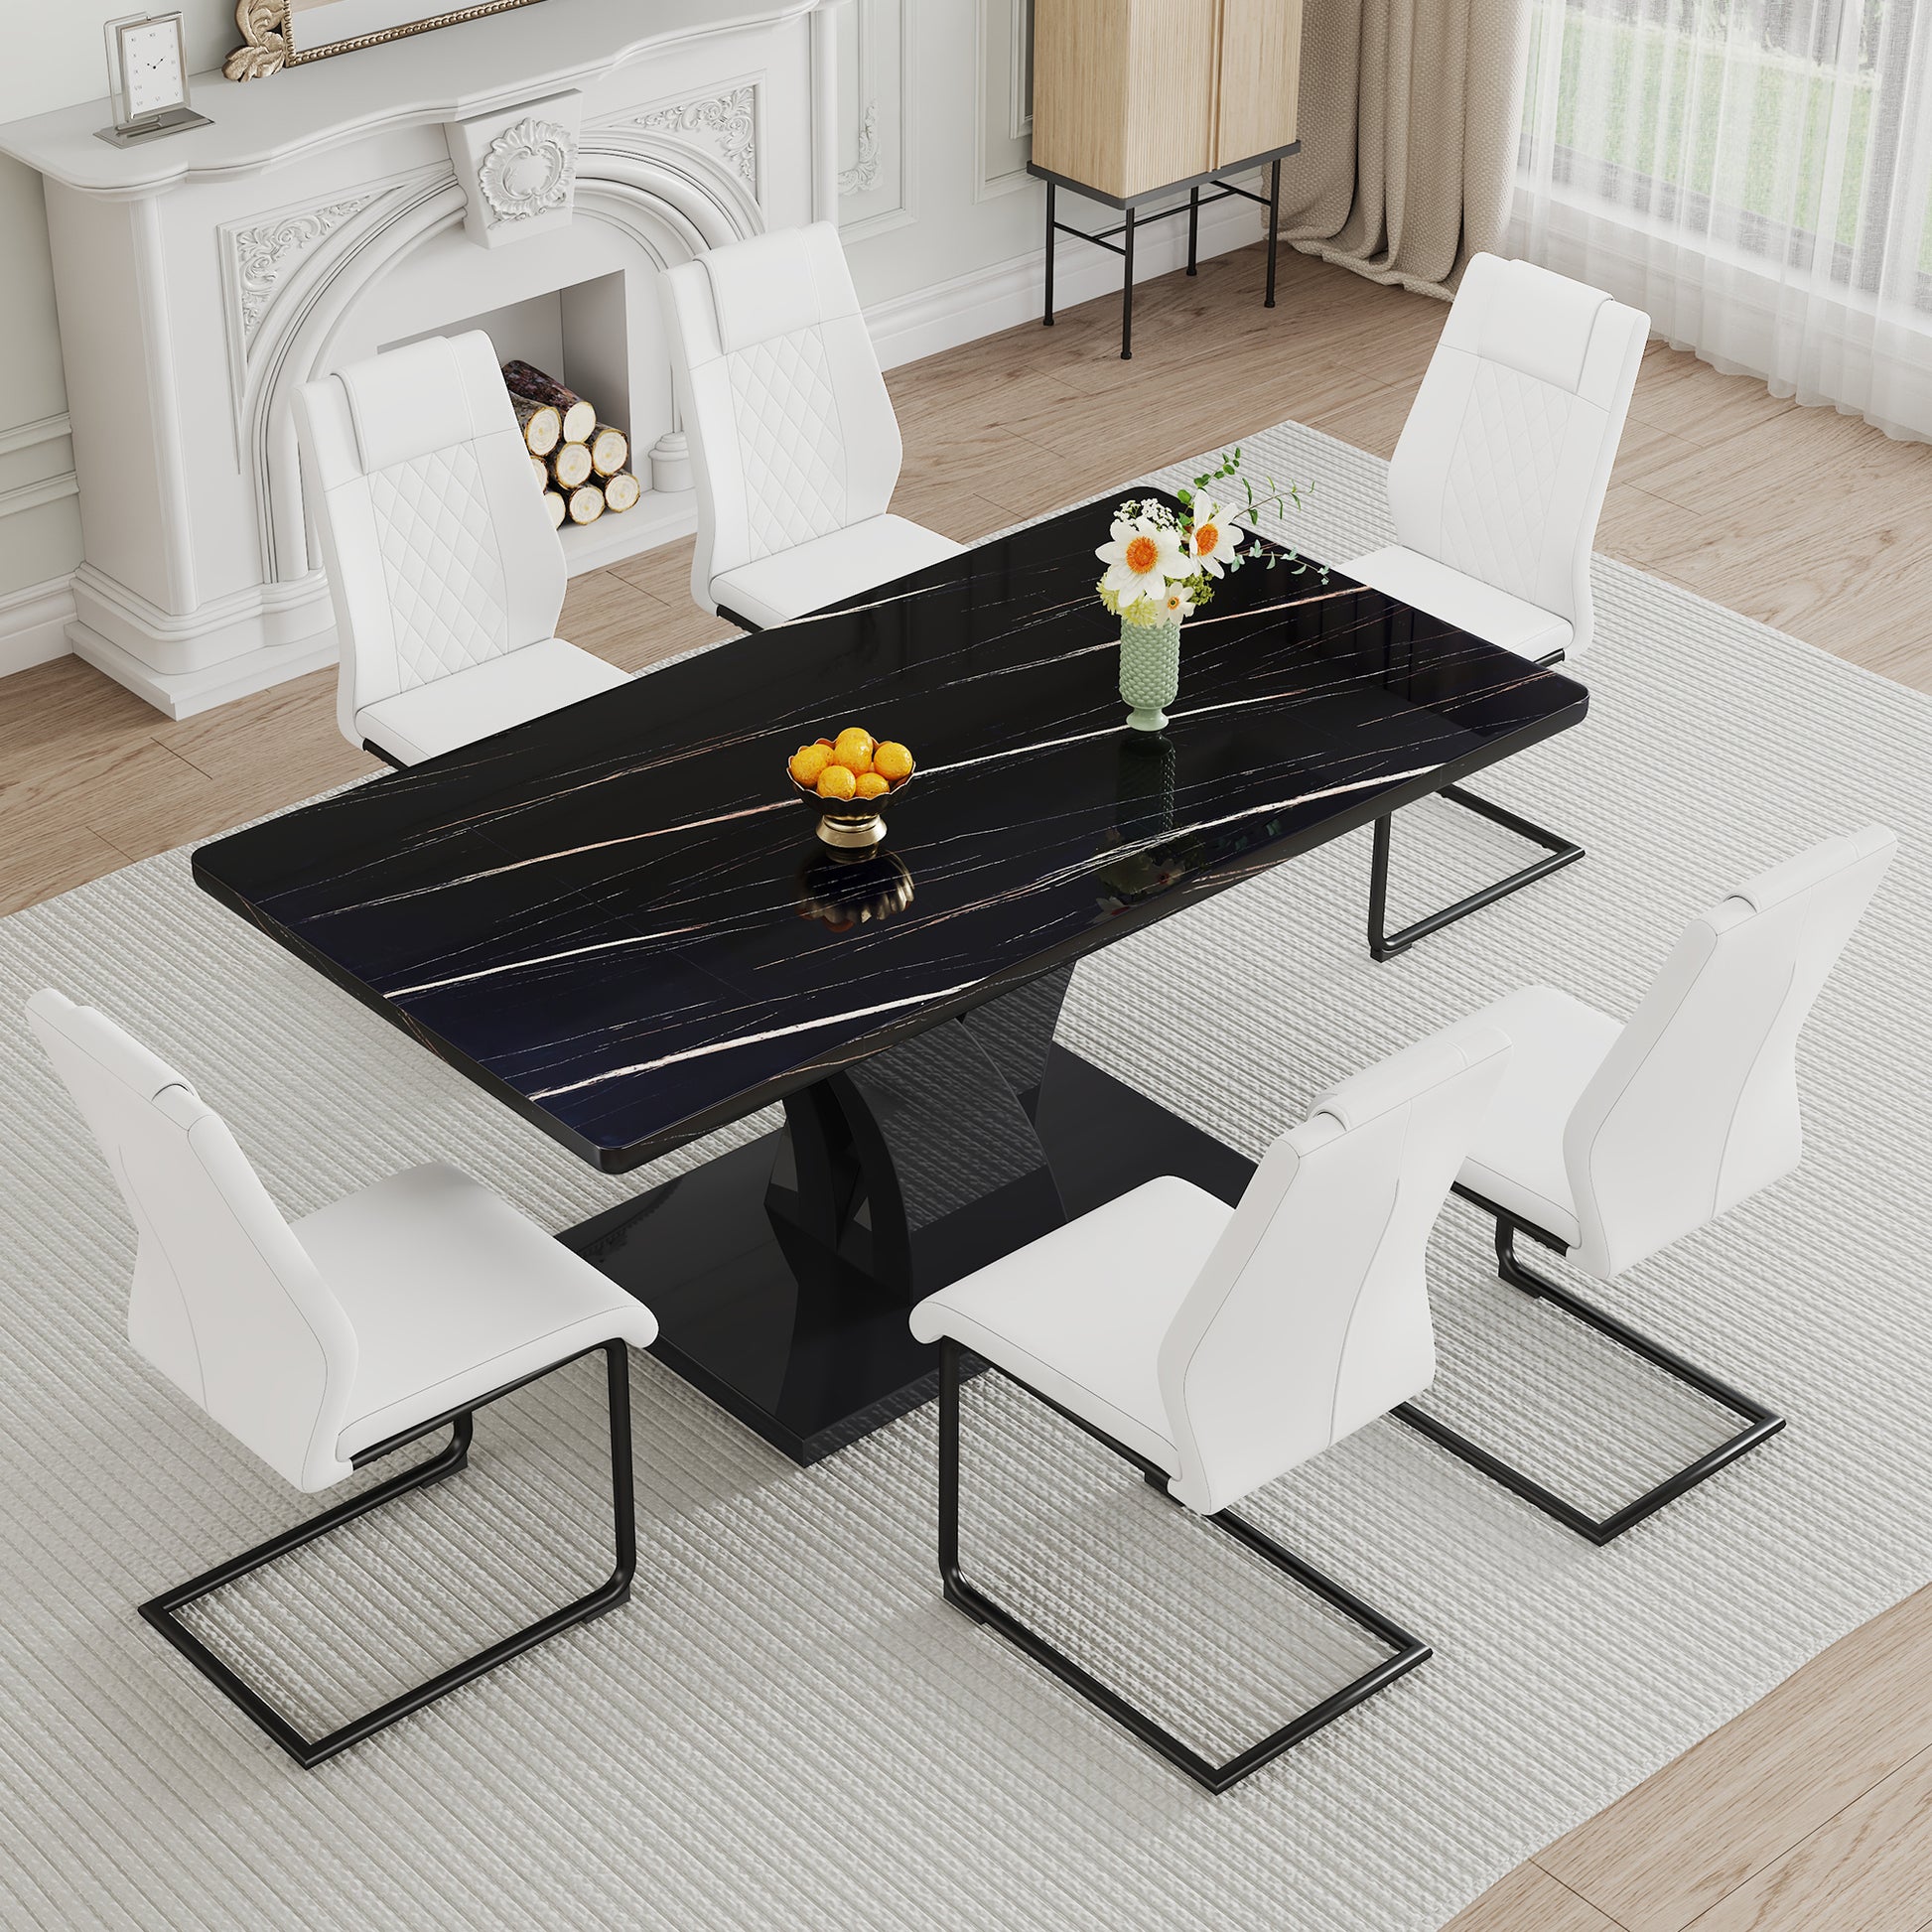 Table and chair set, modern dining table, black black-mdf